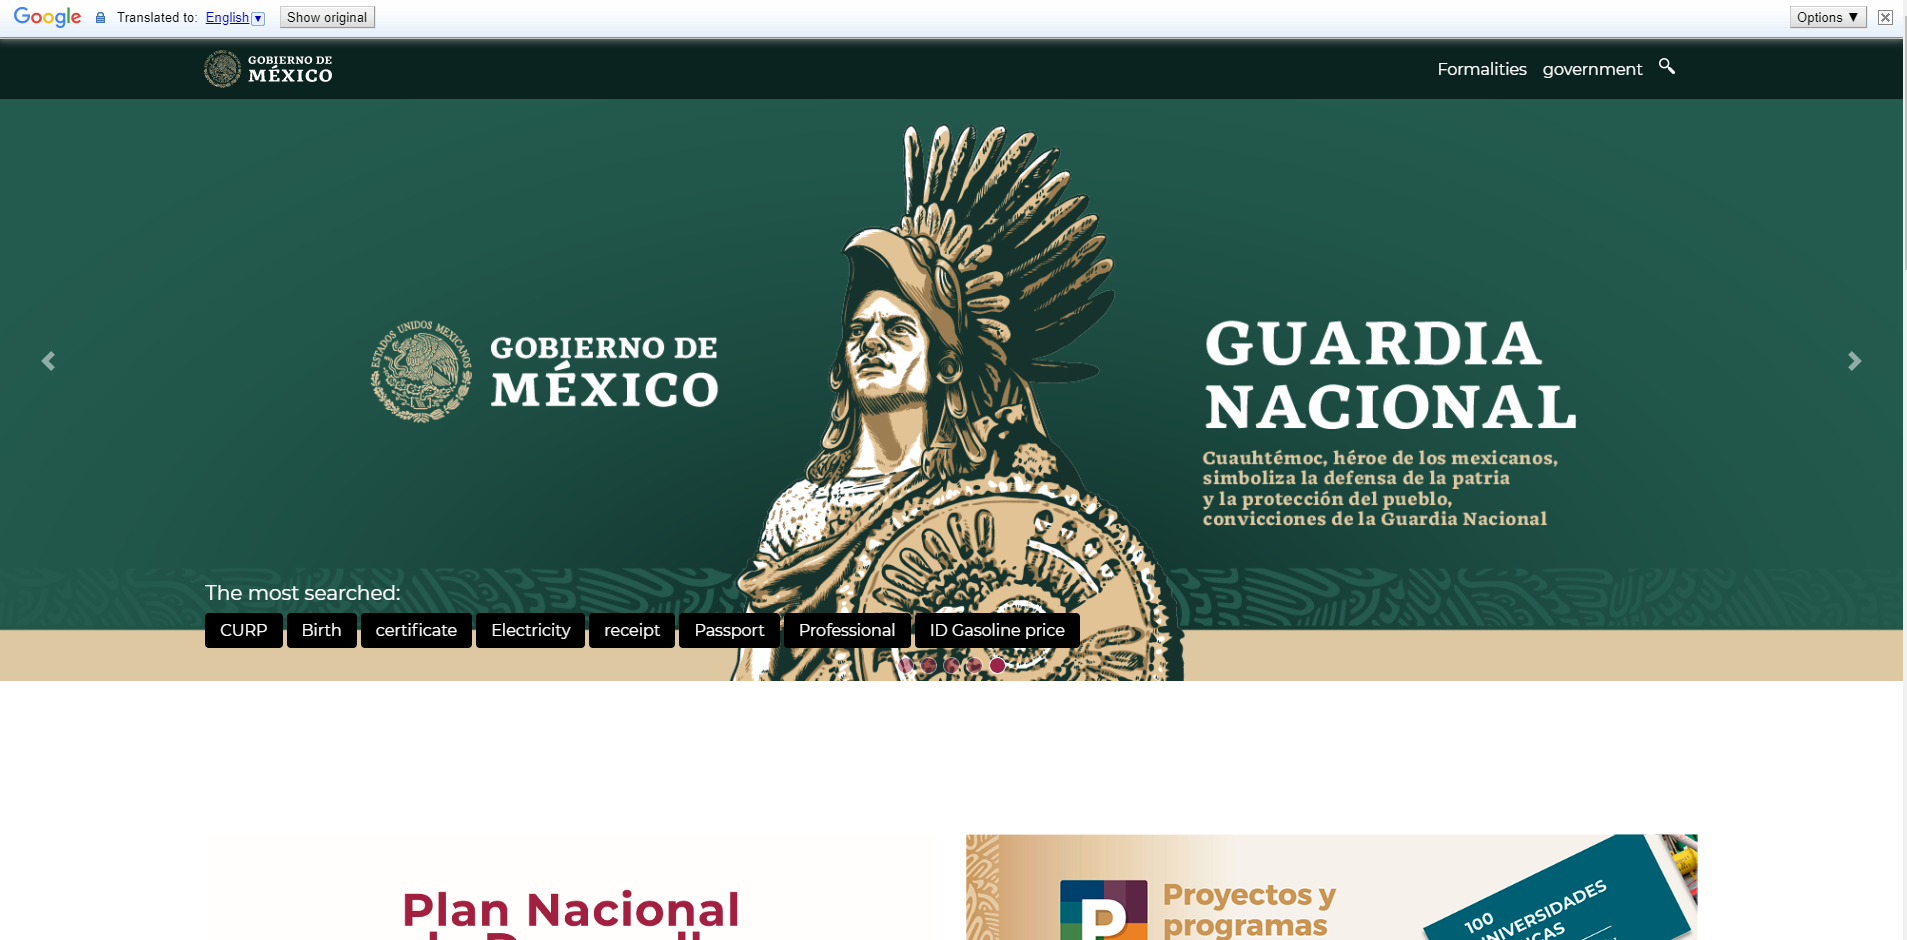 Gobierno de México website in English. Not all of the text is translated because a lot of it is included in an image